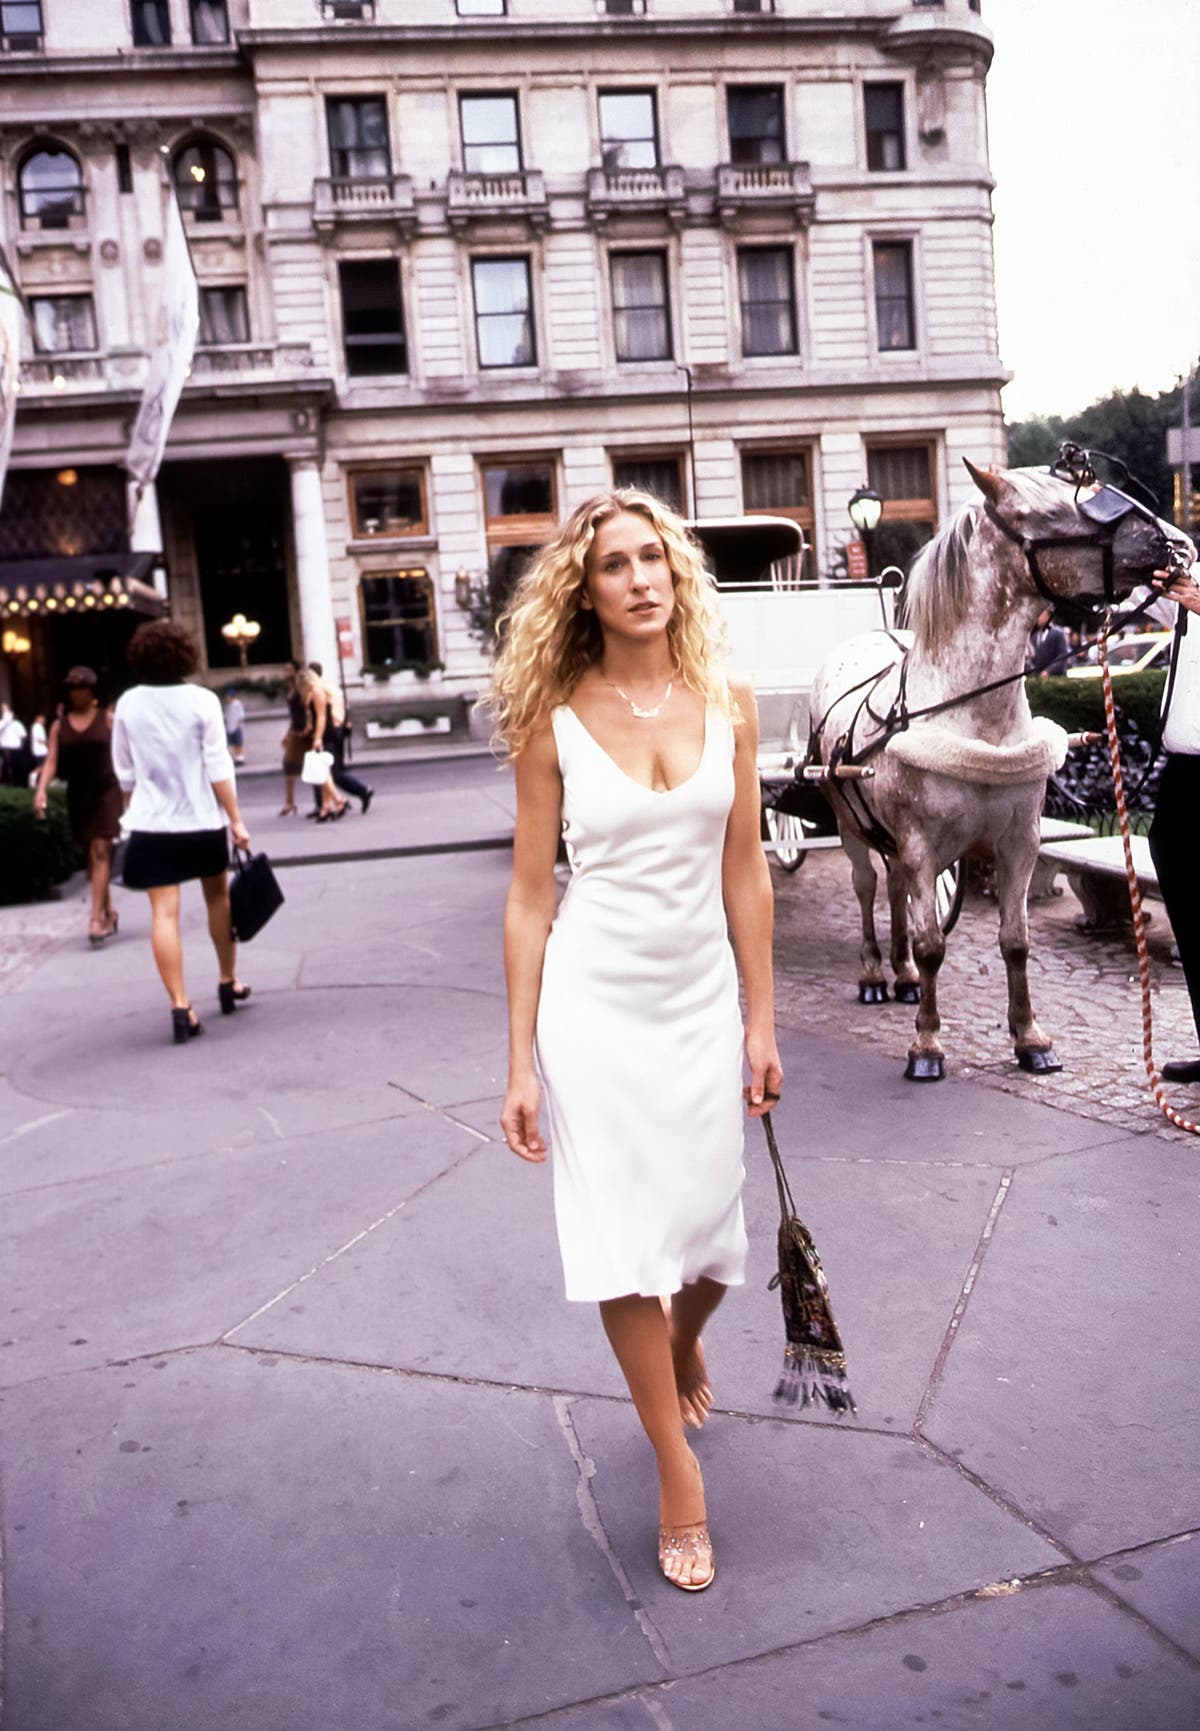 10 Throwback Carrie Bradshaw Outfits That Still Work for 2023